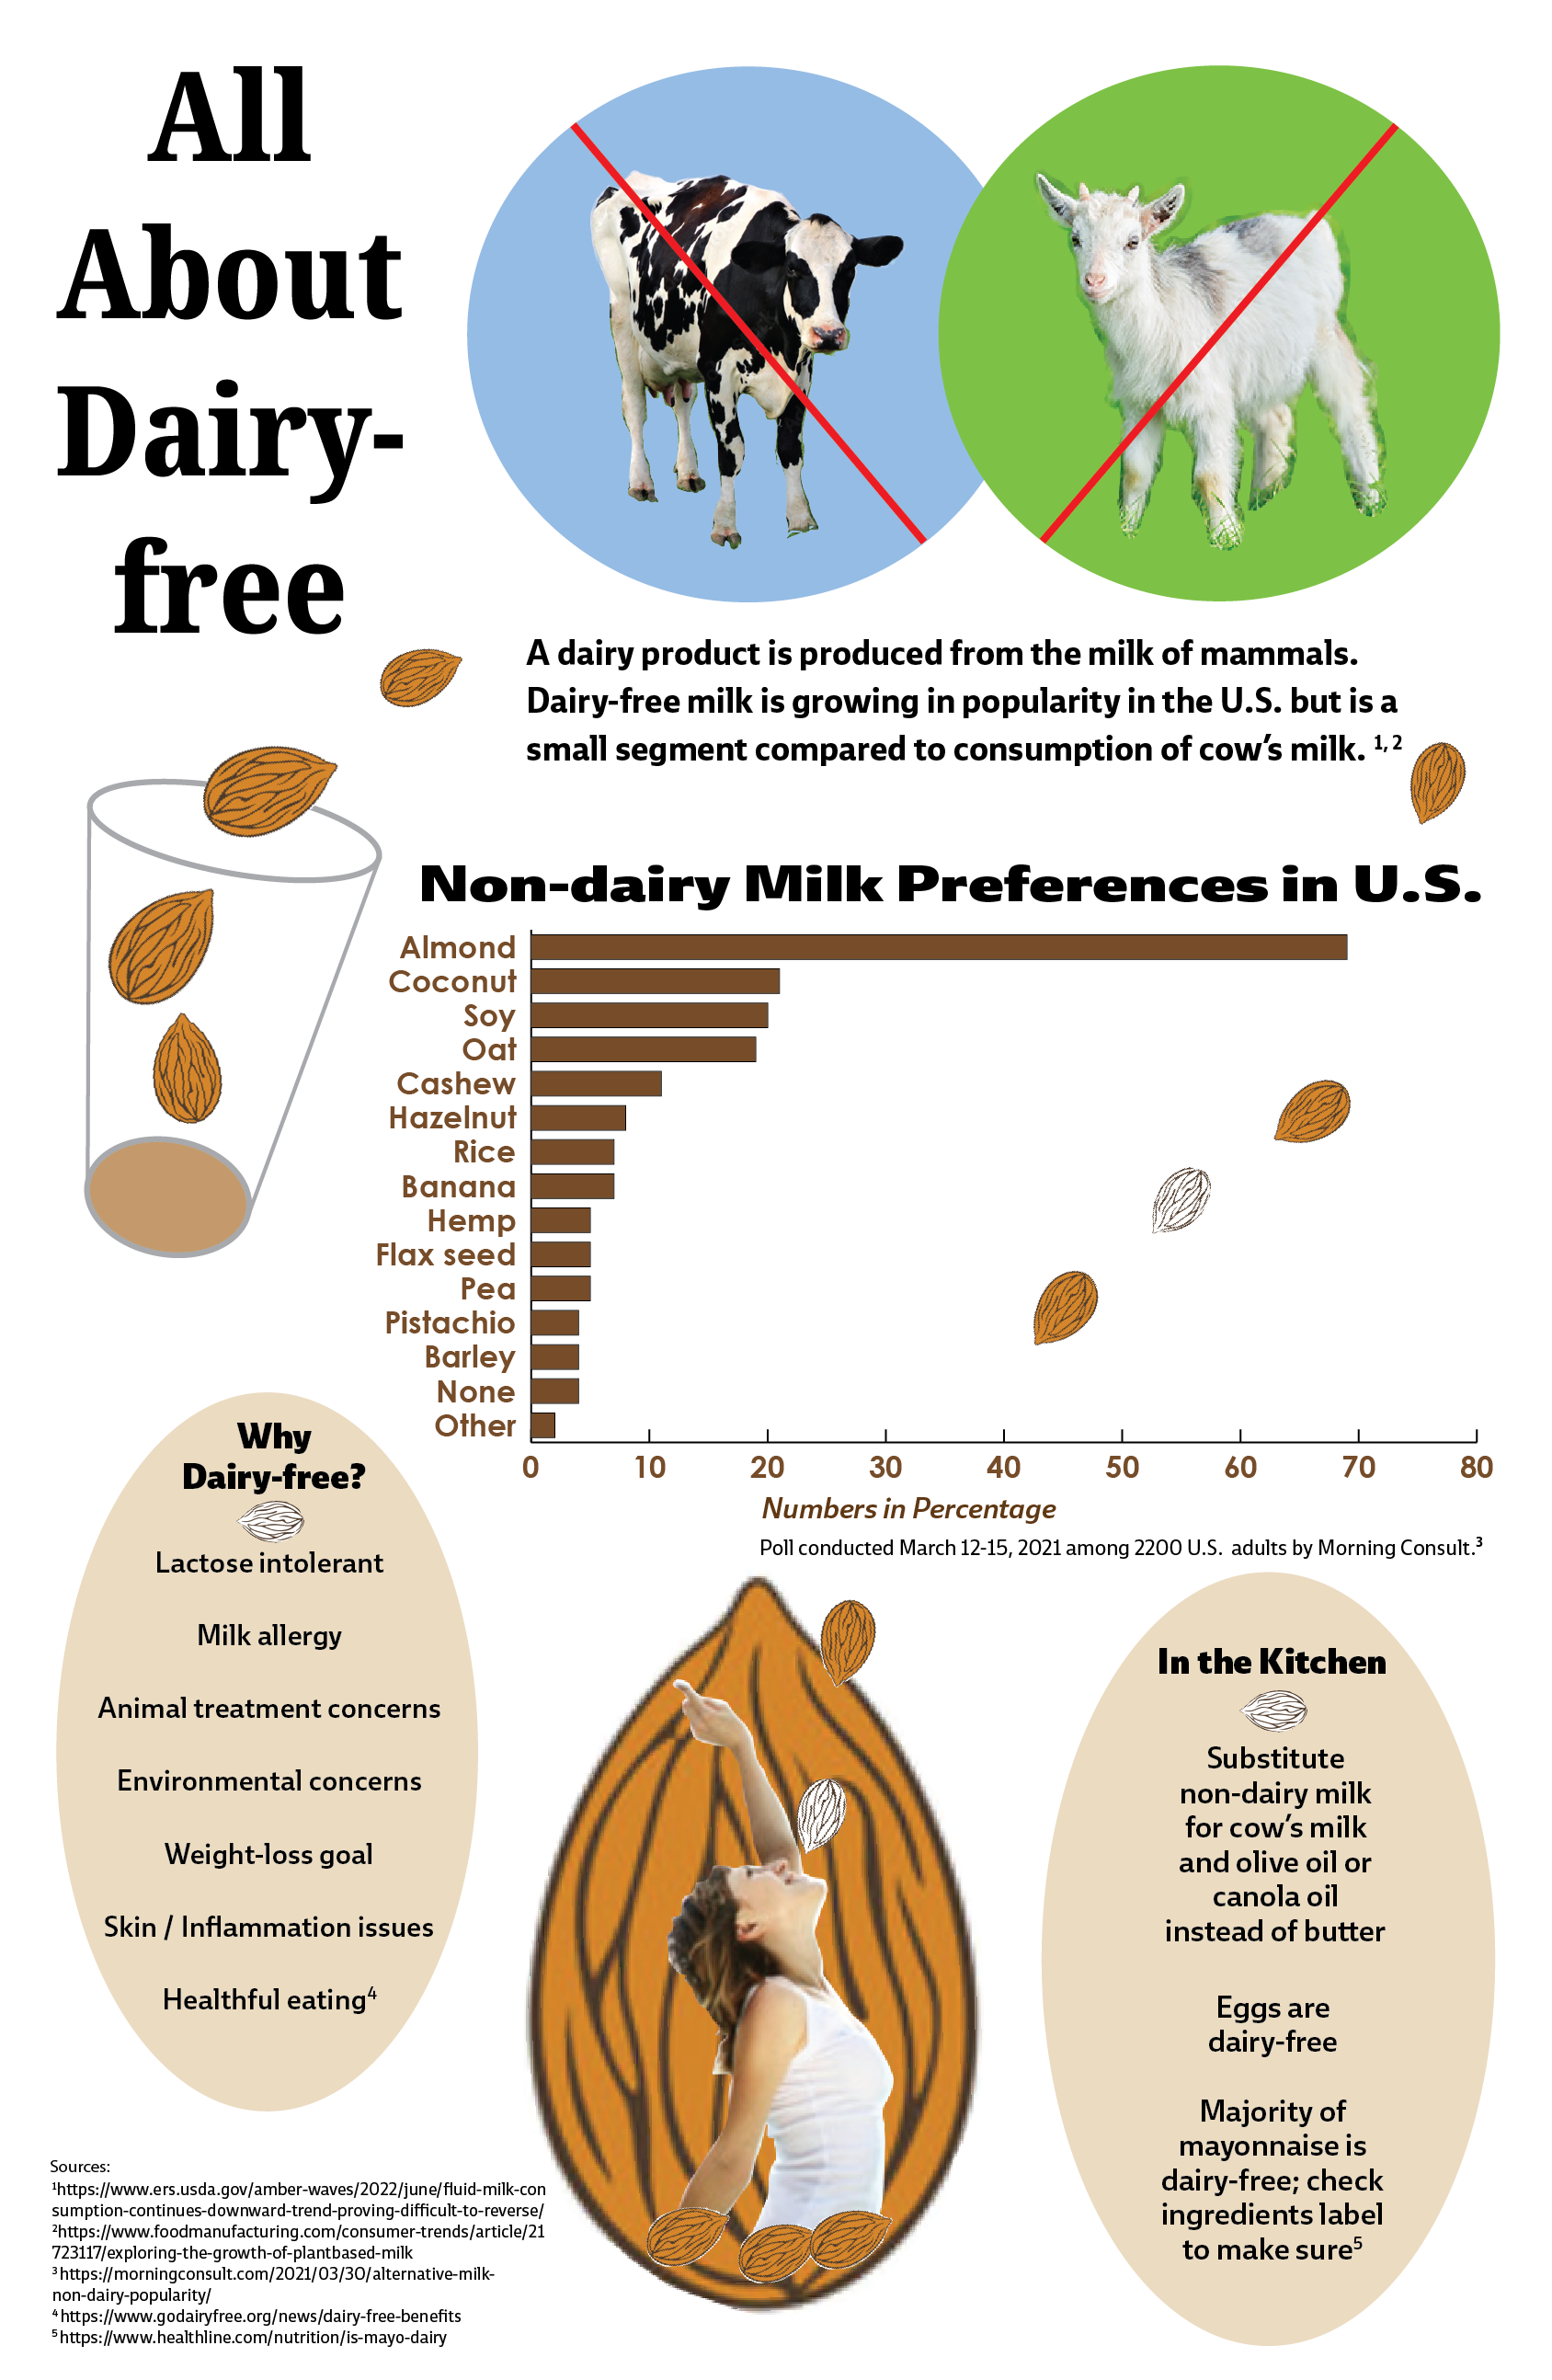 Almonds seem to be going in and coming out of a glass towards a cow and goat, each with a red diagonal line through them. All About Dairy-free is at the top left with a chart on Non-dairy milk preferences in the U.S. A woman with upheld arm looks happy as almonds seem to be coming towards her mouth. Facts about what dairy-free is are at the bottom of the infographic.